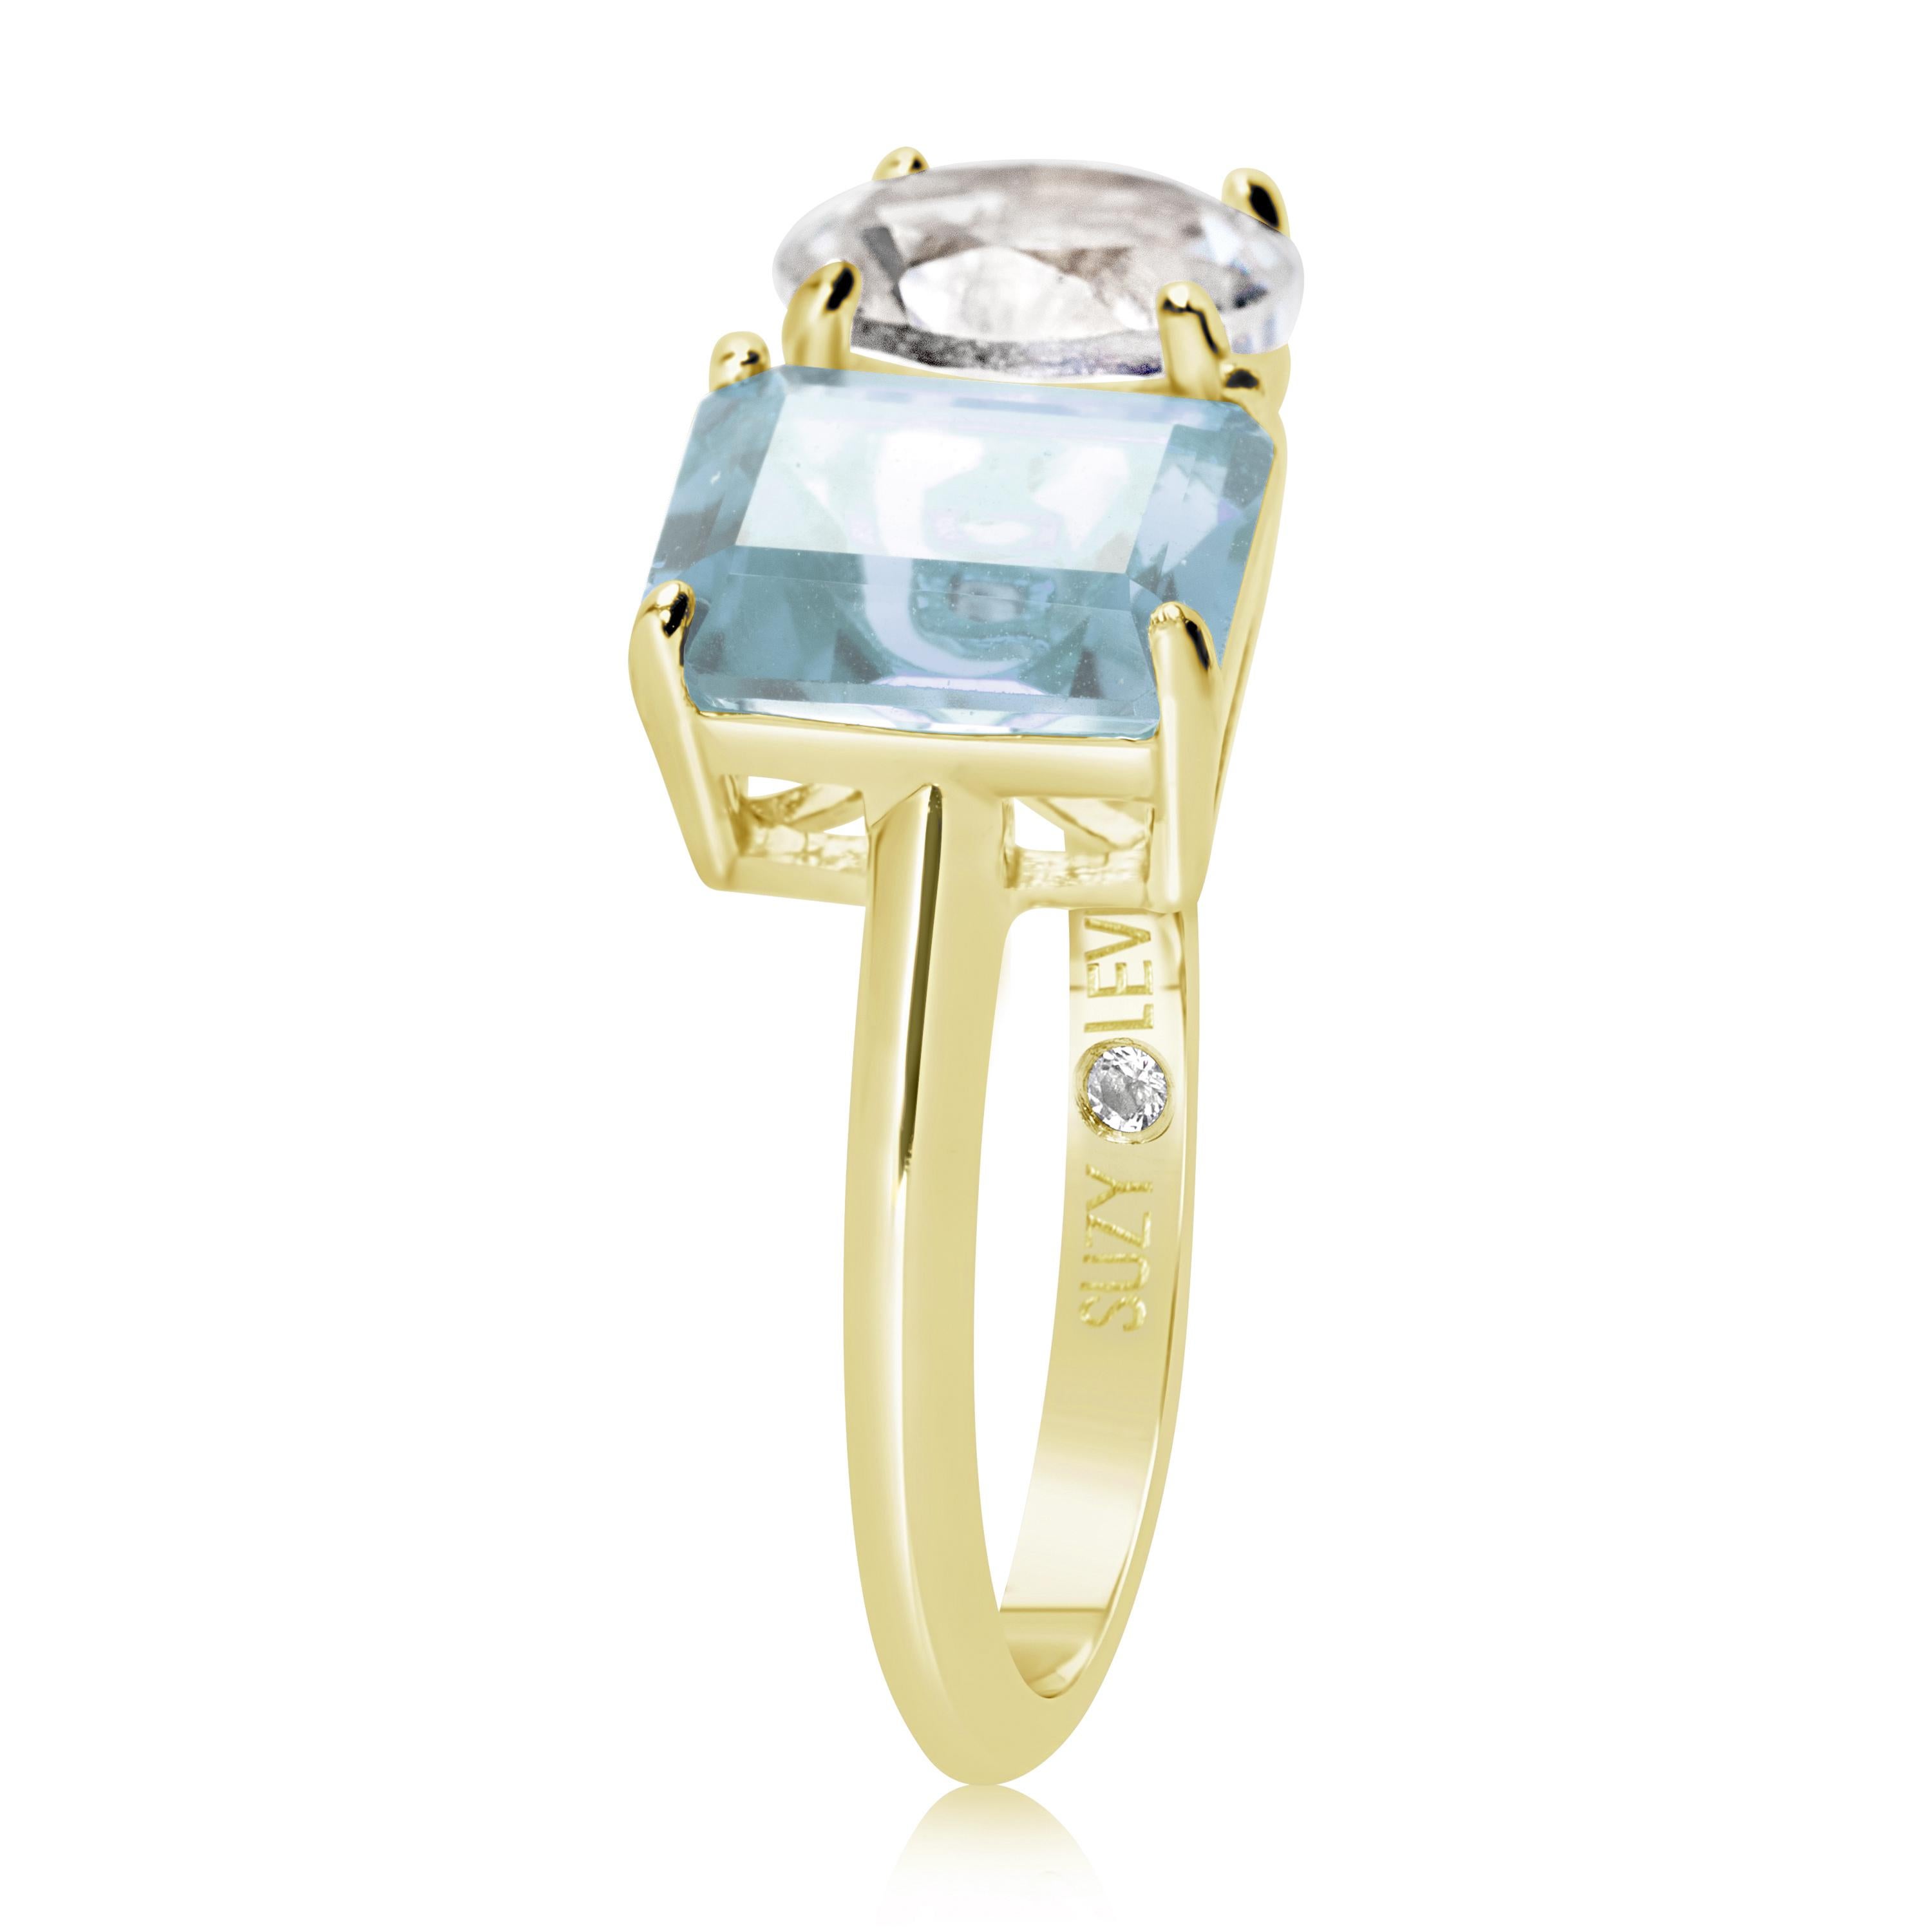 Shimmering in hues of white and blue, this Suzy Levian ring is as on trend as can be, and features a round cut white topaz and an emerald cut blue topaz as a perfectly matched pair. This ring symbolizes a perfect pairing of unique shapes. This ring